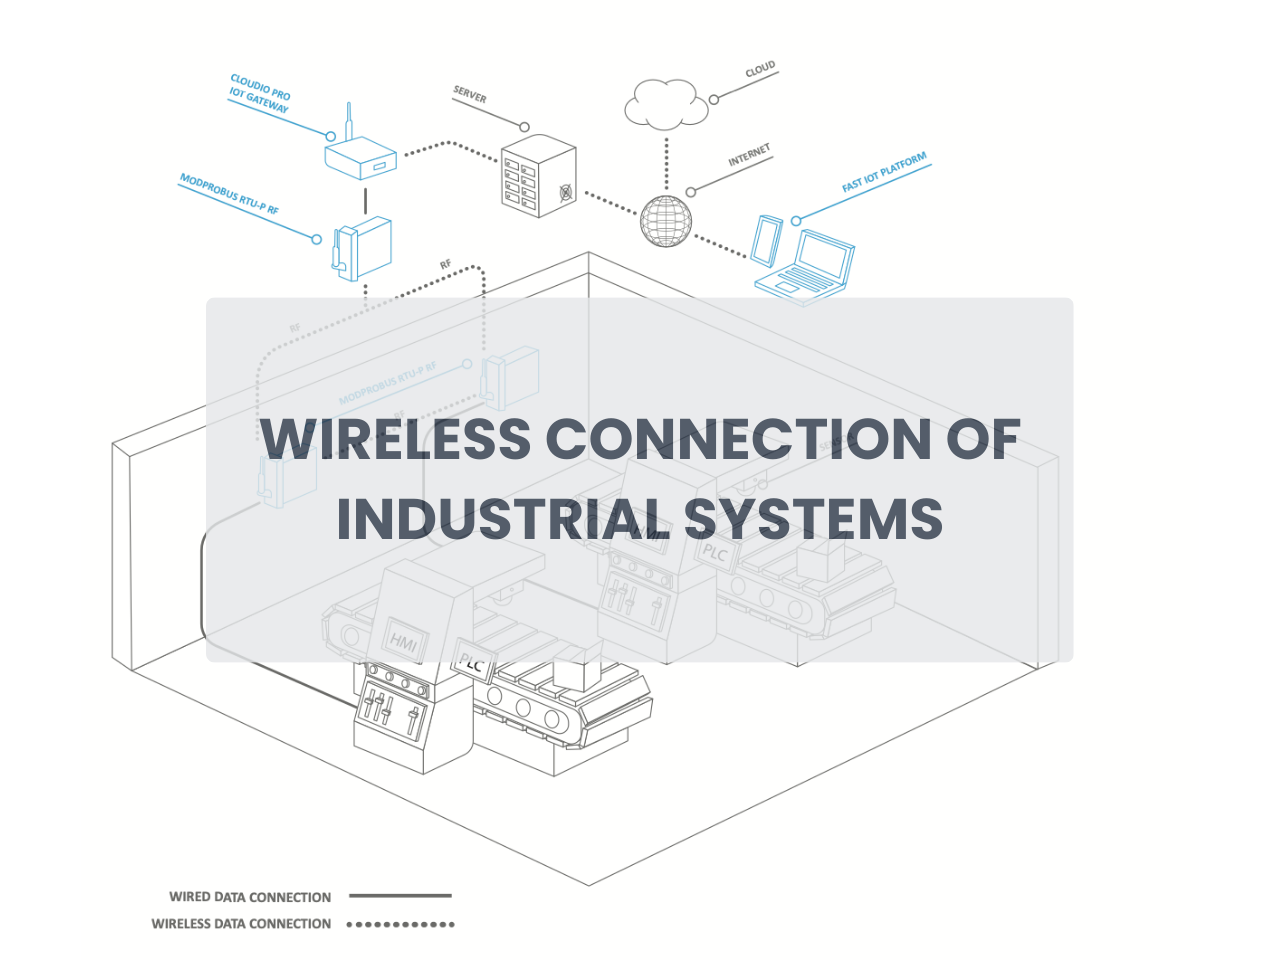 WIRELESS CONNECTION OF INDUSTRIAL SYSTEMS